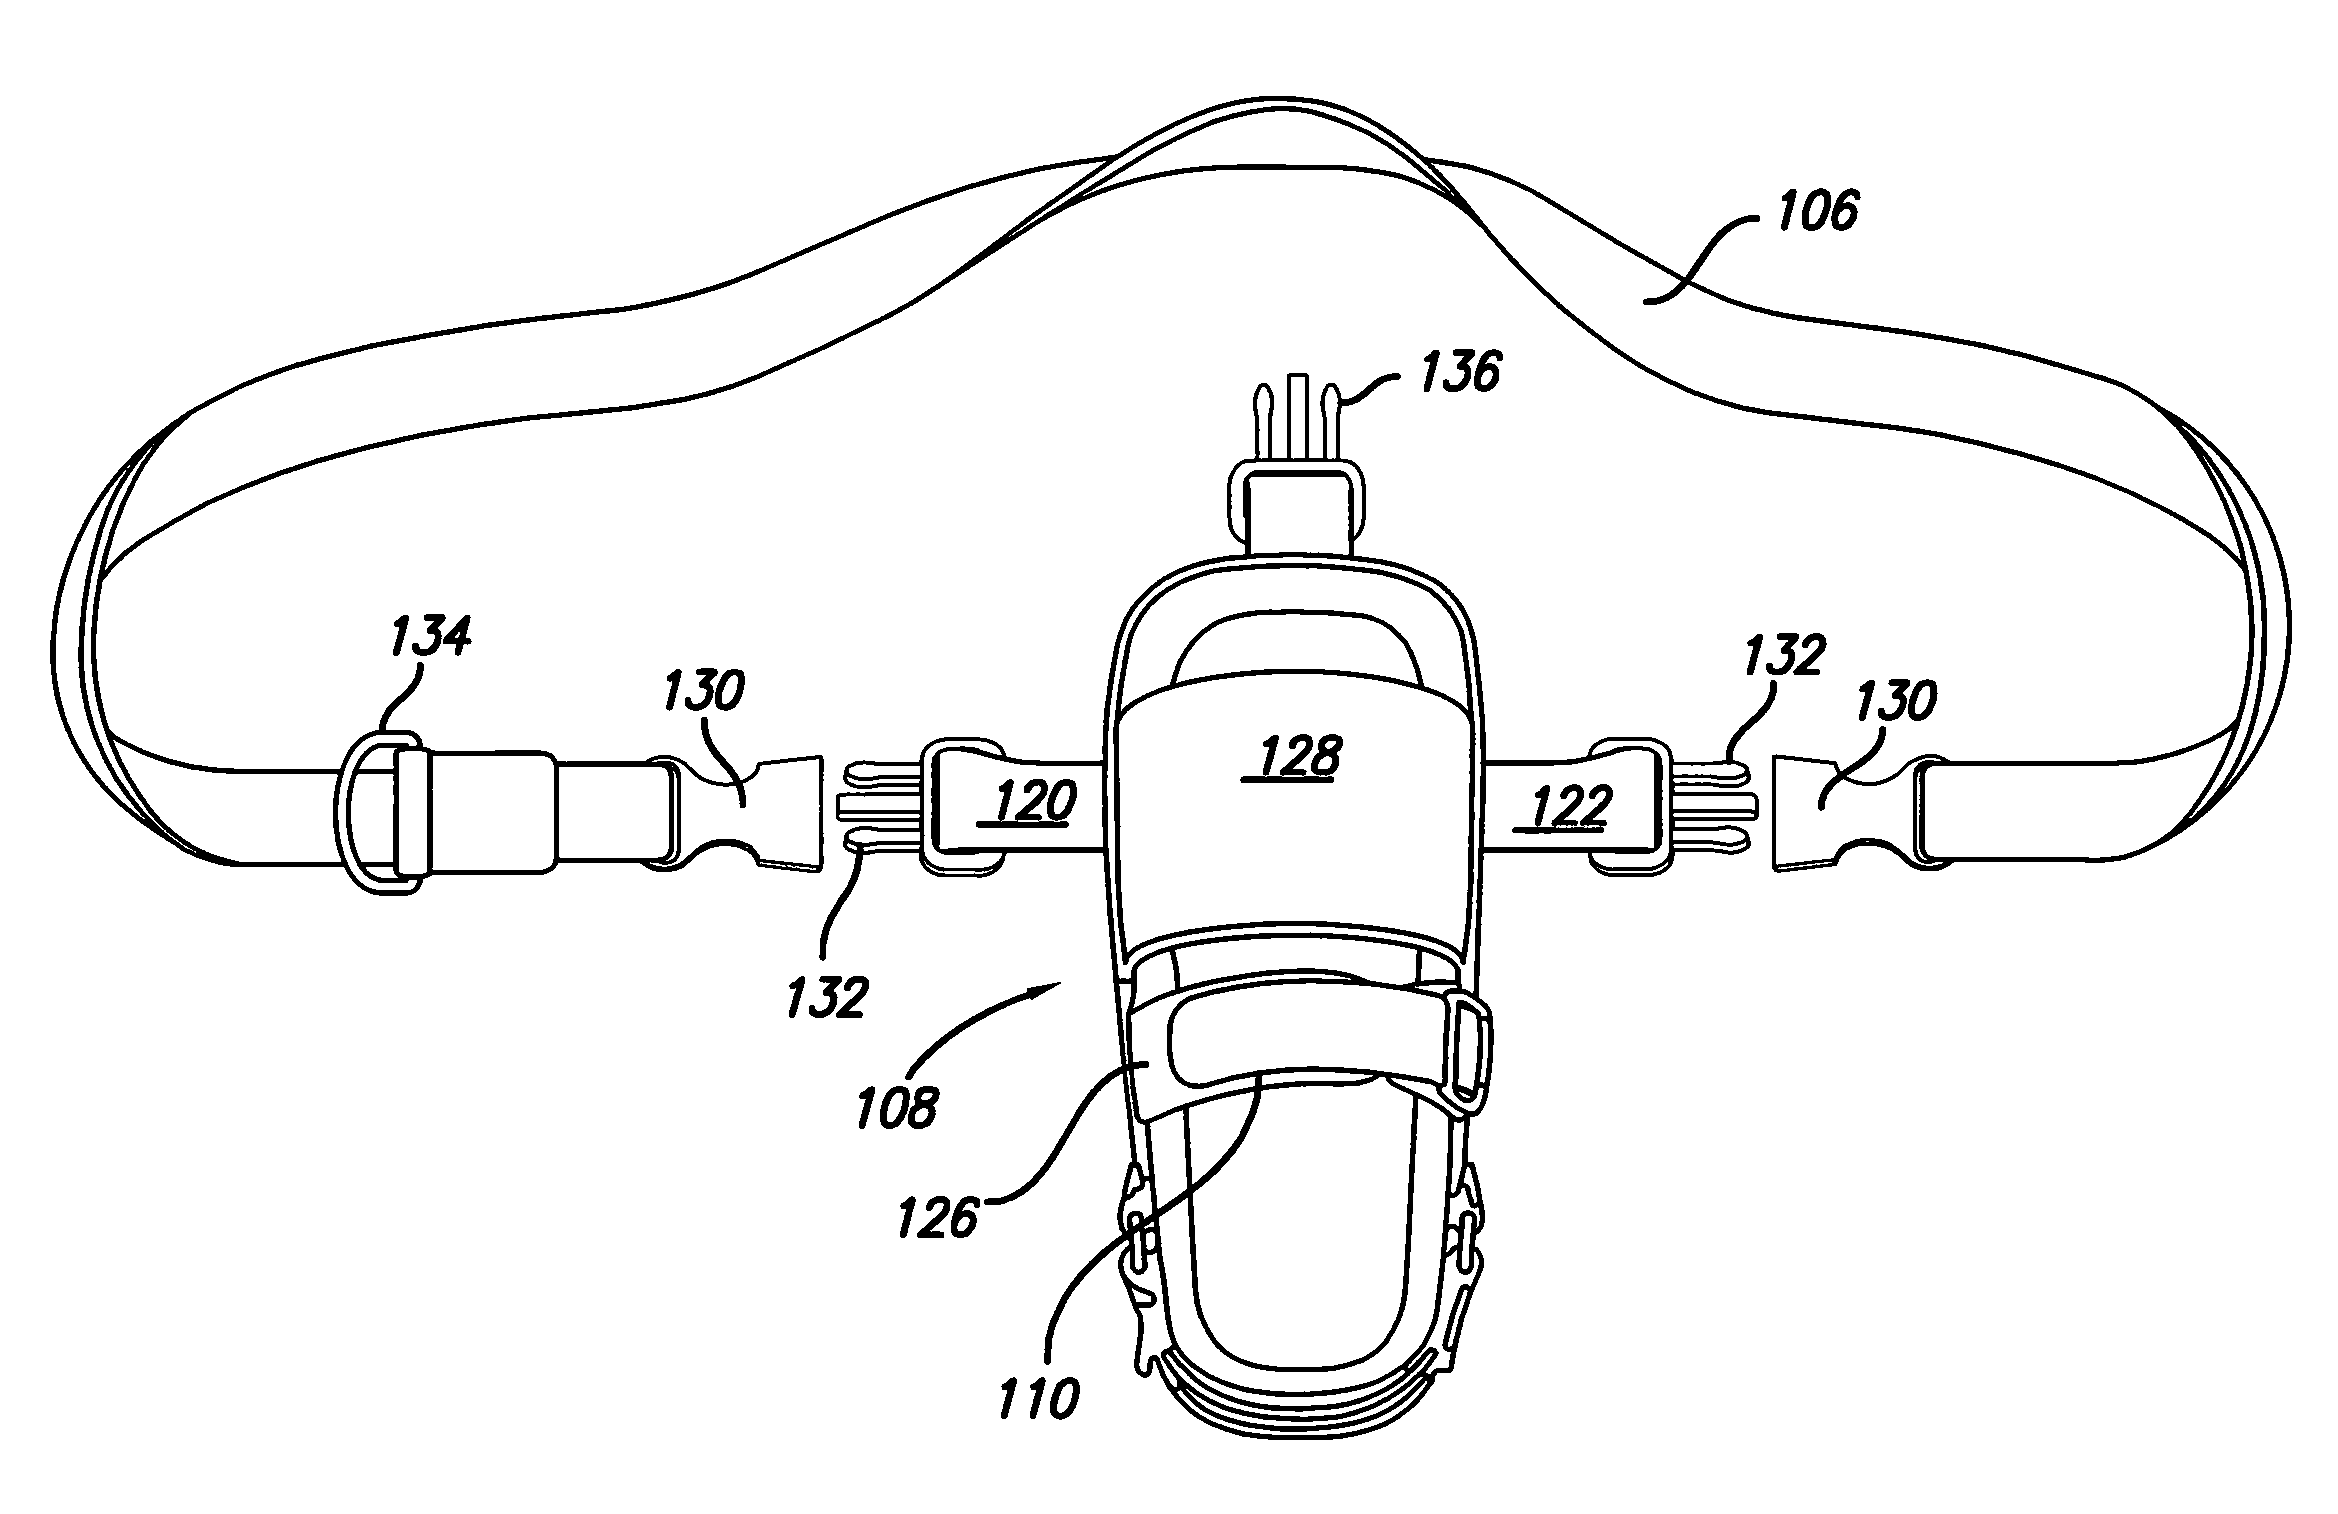 Stride stretching apparatus and method